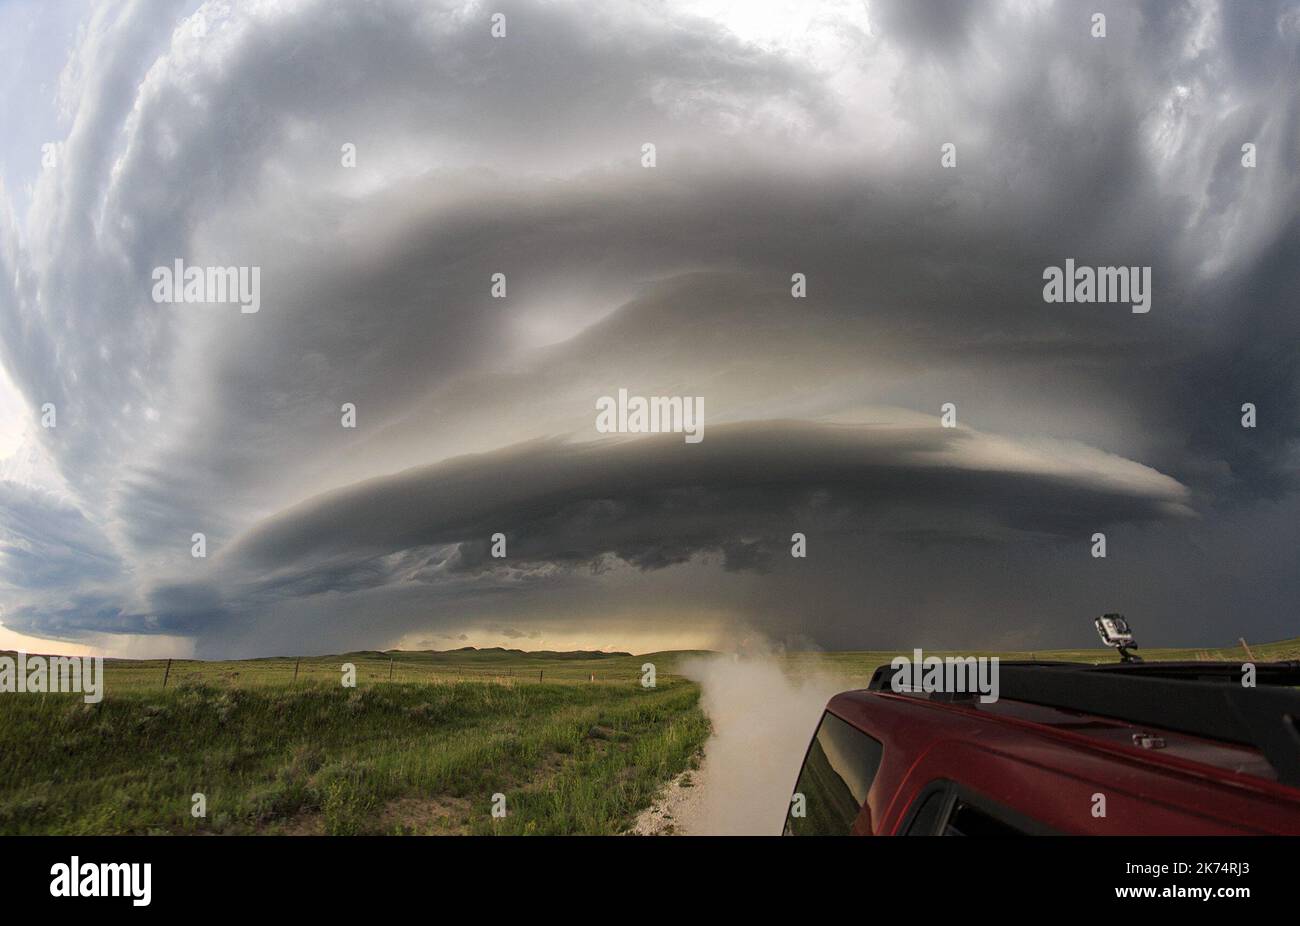 Storm chaser has captured incredible footage from the eye of America‚'s most fearsome storms after spending a month in the country‚'s notorious Tornado Alley. Lightning bolts streak across the sky and golf ball-sized hailstones crash down to earth in extraordinary video captured by Slovenian storm chaser Marko Korosec Stock Photo